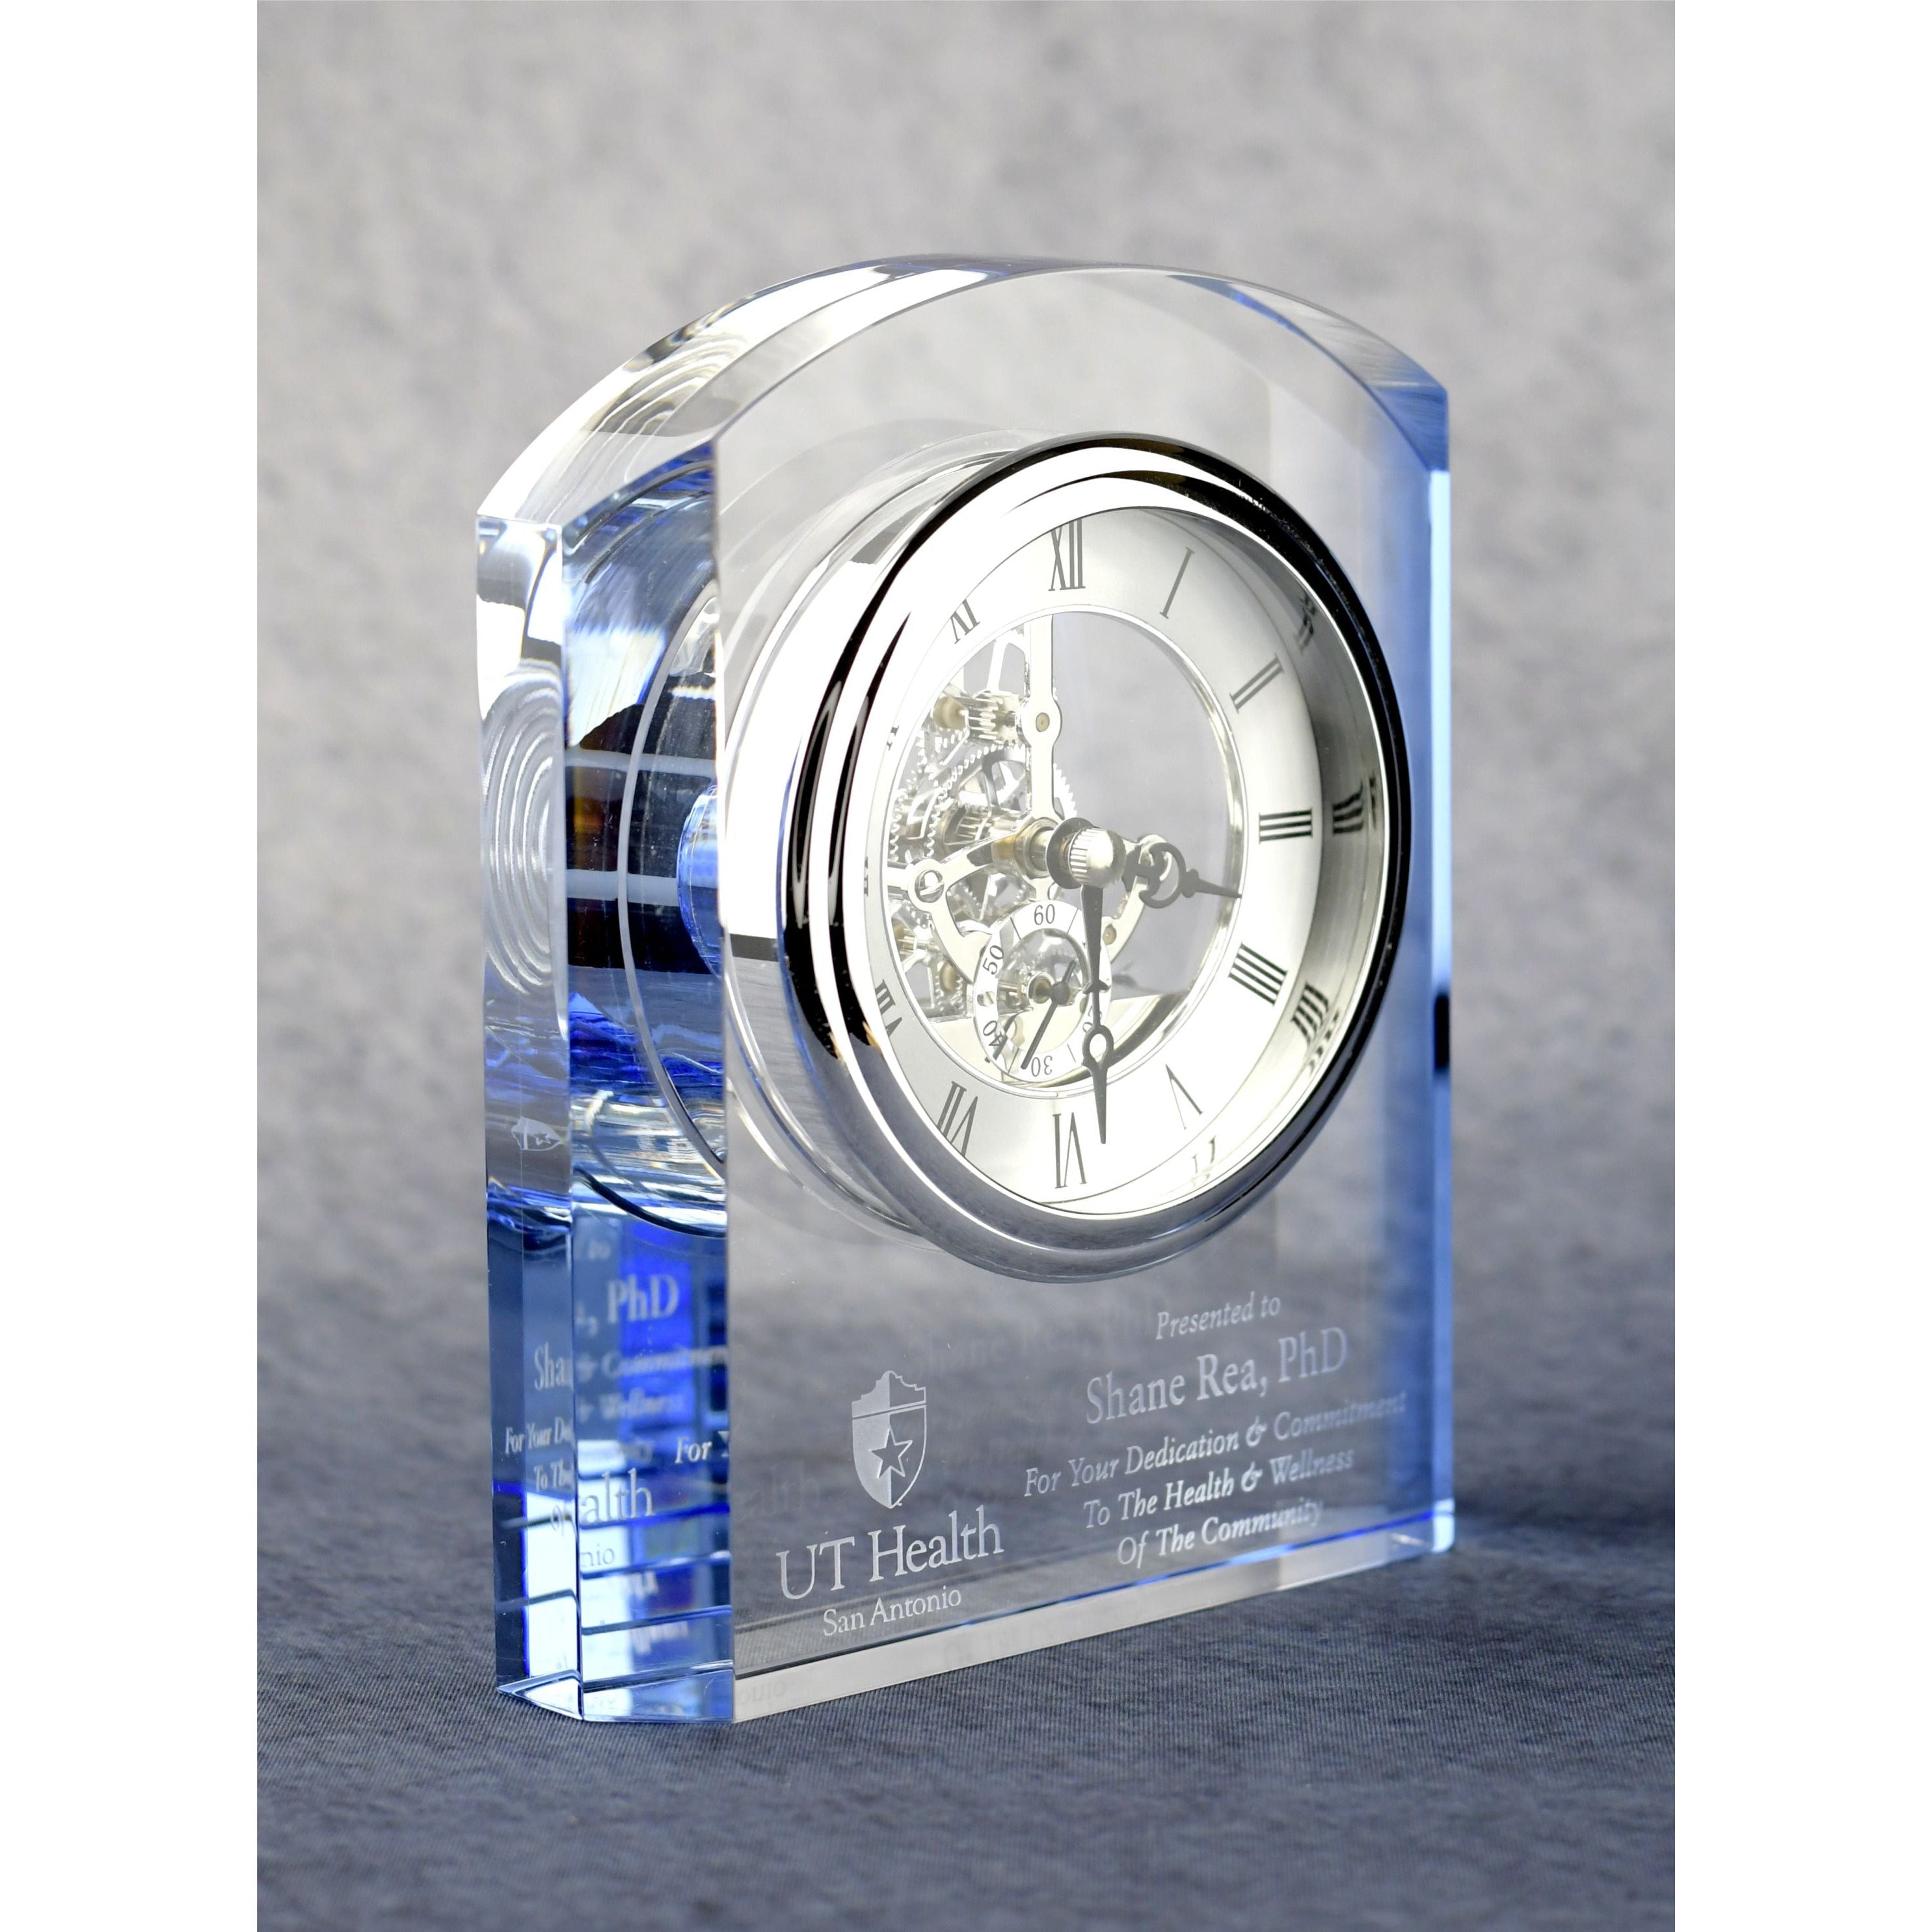 Crystal Clock With Blue Accents | Alliance Awards LLC.